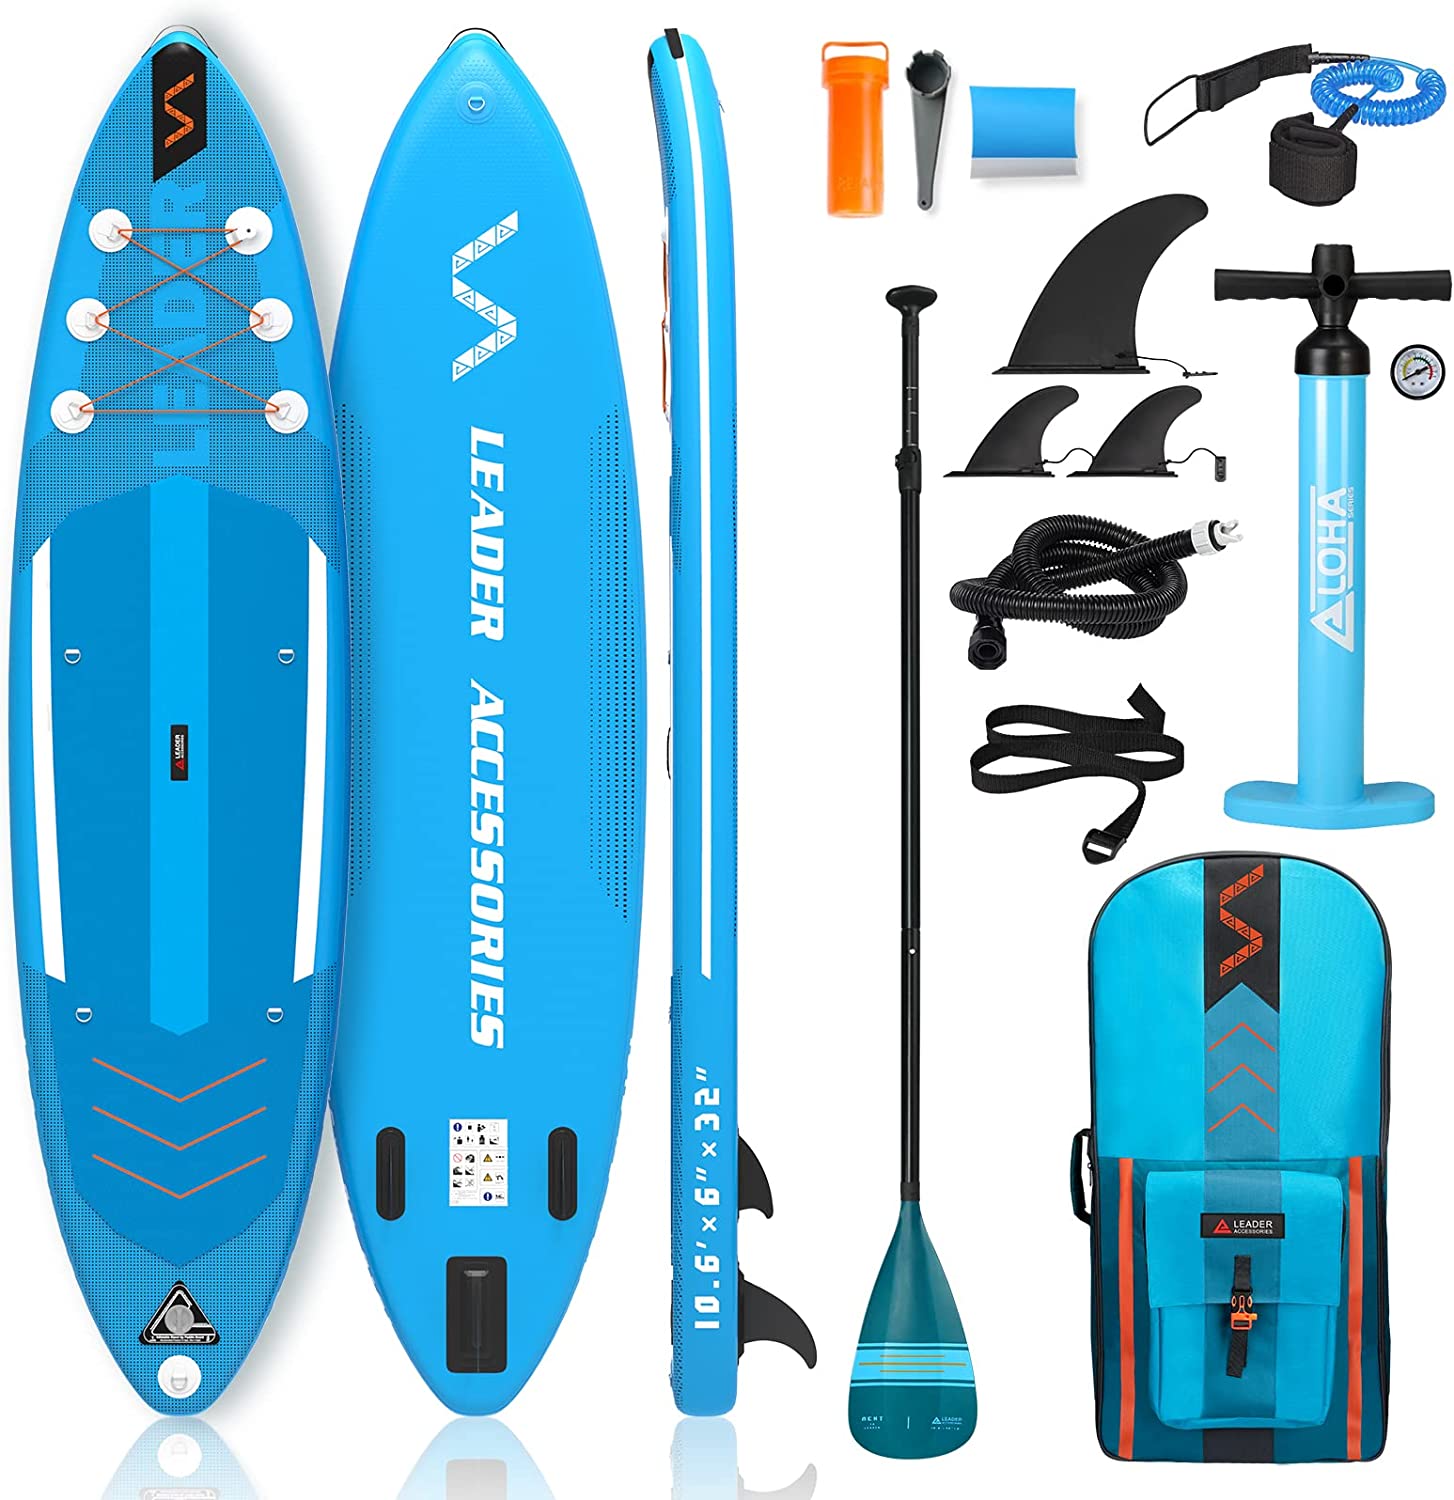 Leader Accessories Inflatable Stand Up Paddle Board Blue 30% Off Now At $139.99